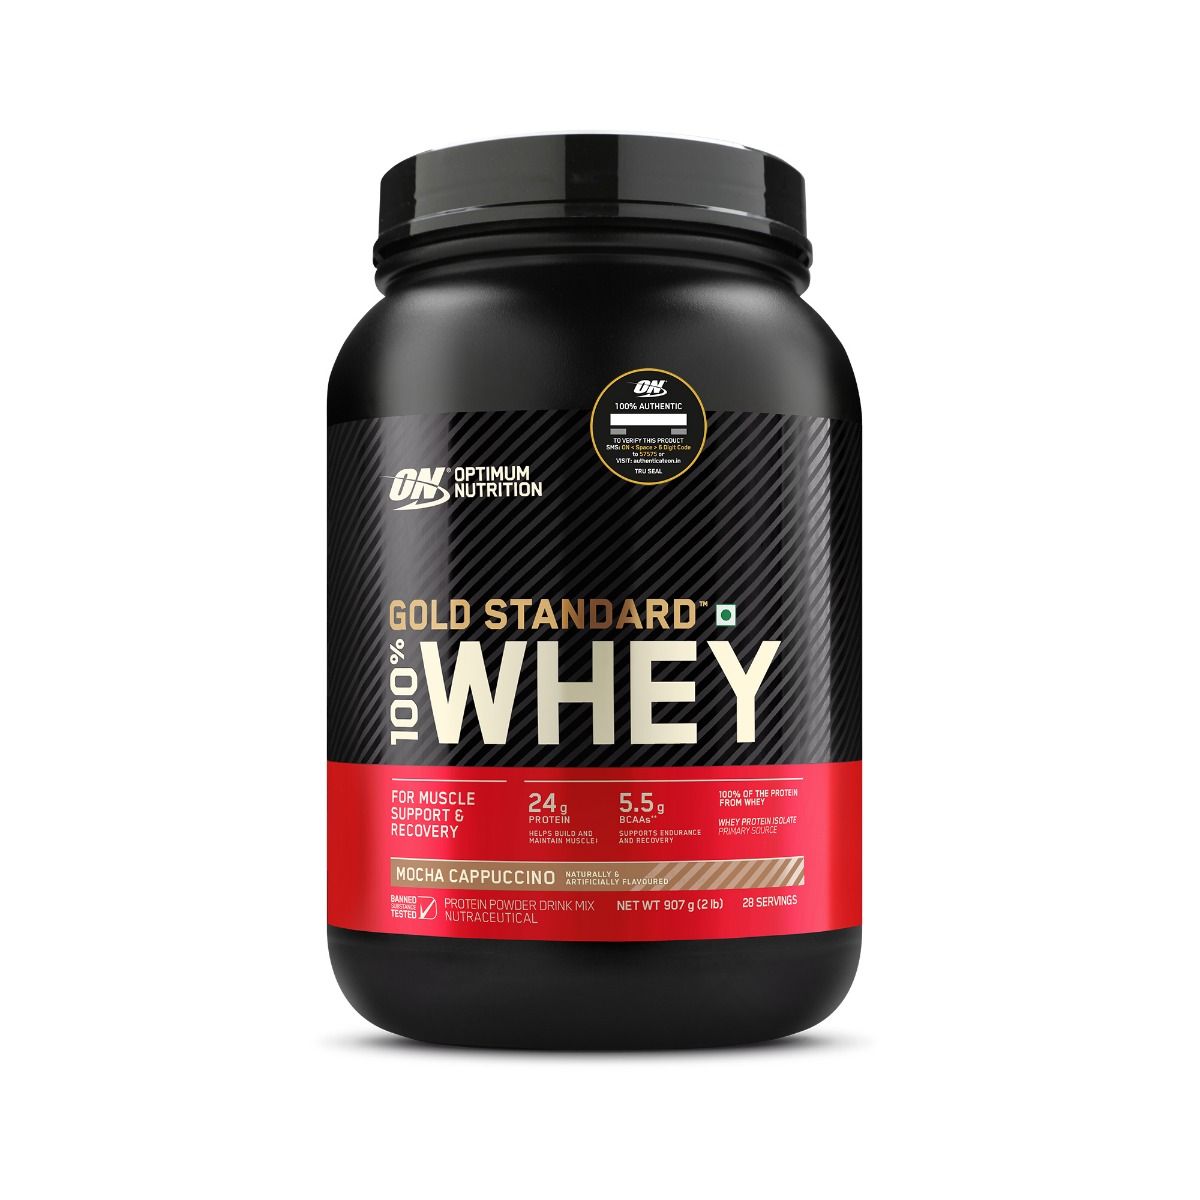 Optimum Nutrition (ON) Gold Standard 100% Whey Protein Mocha Cappuccino Flavour Powder, 2 lb, Pack of 1 